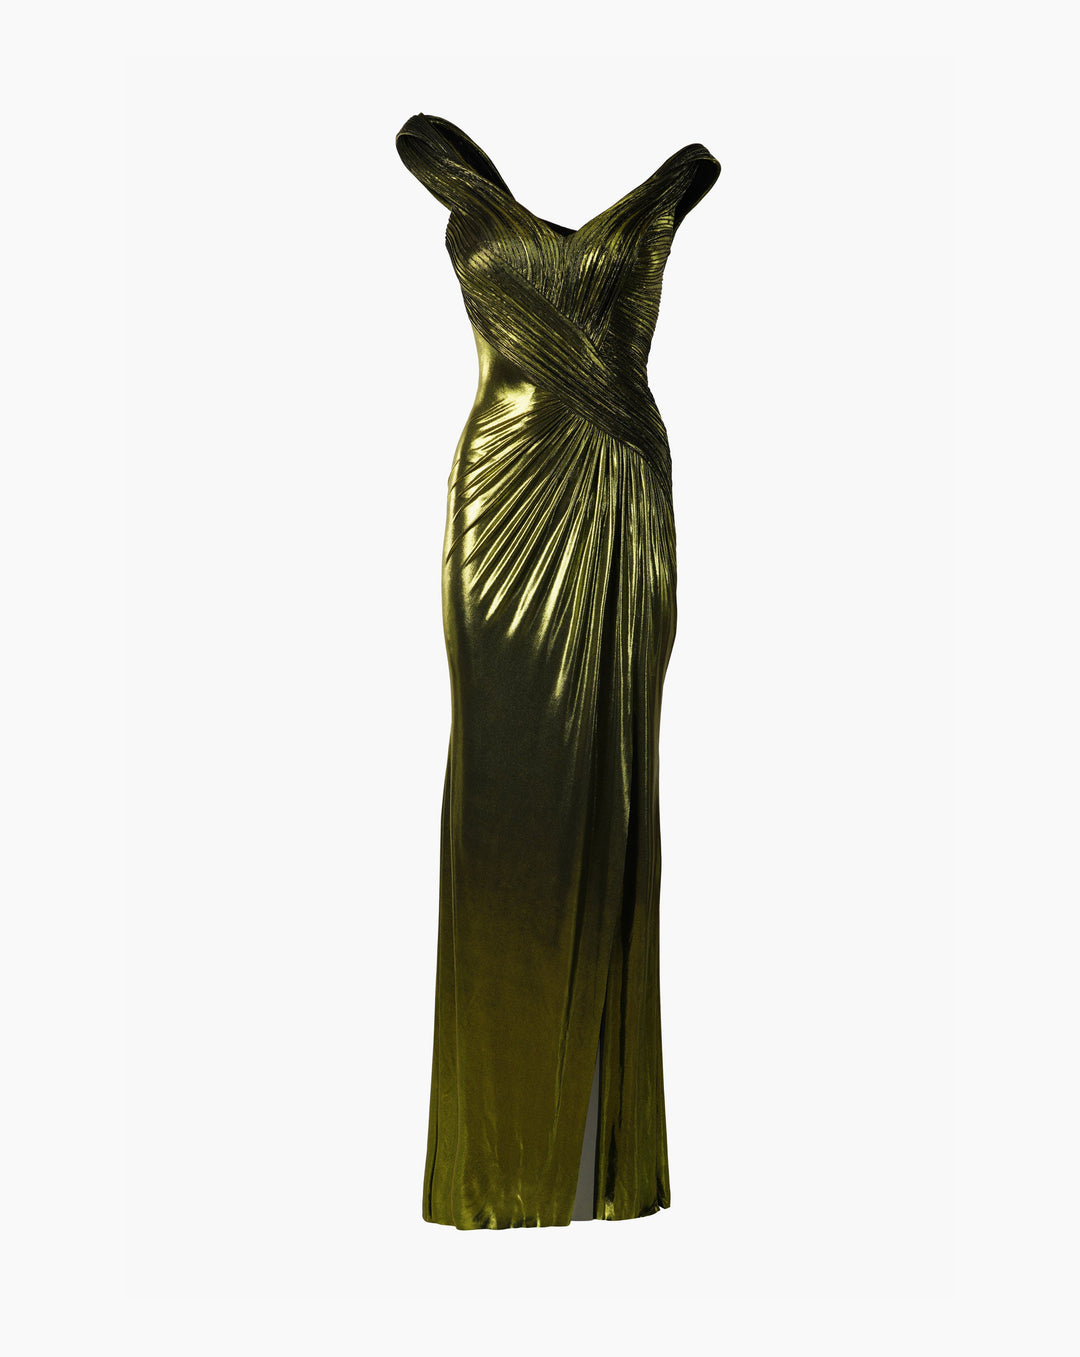 The  Astral Sculpted Gown